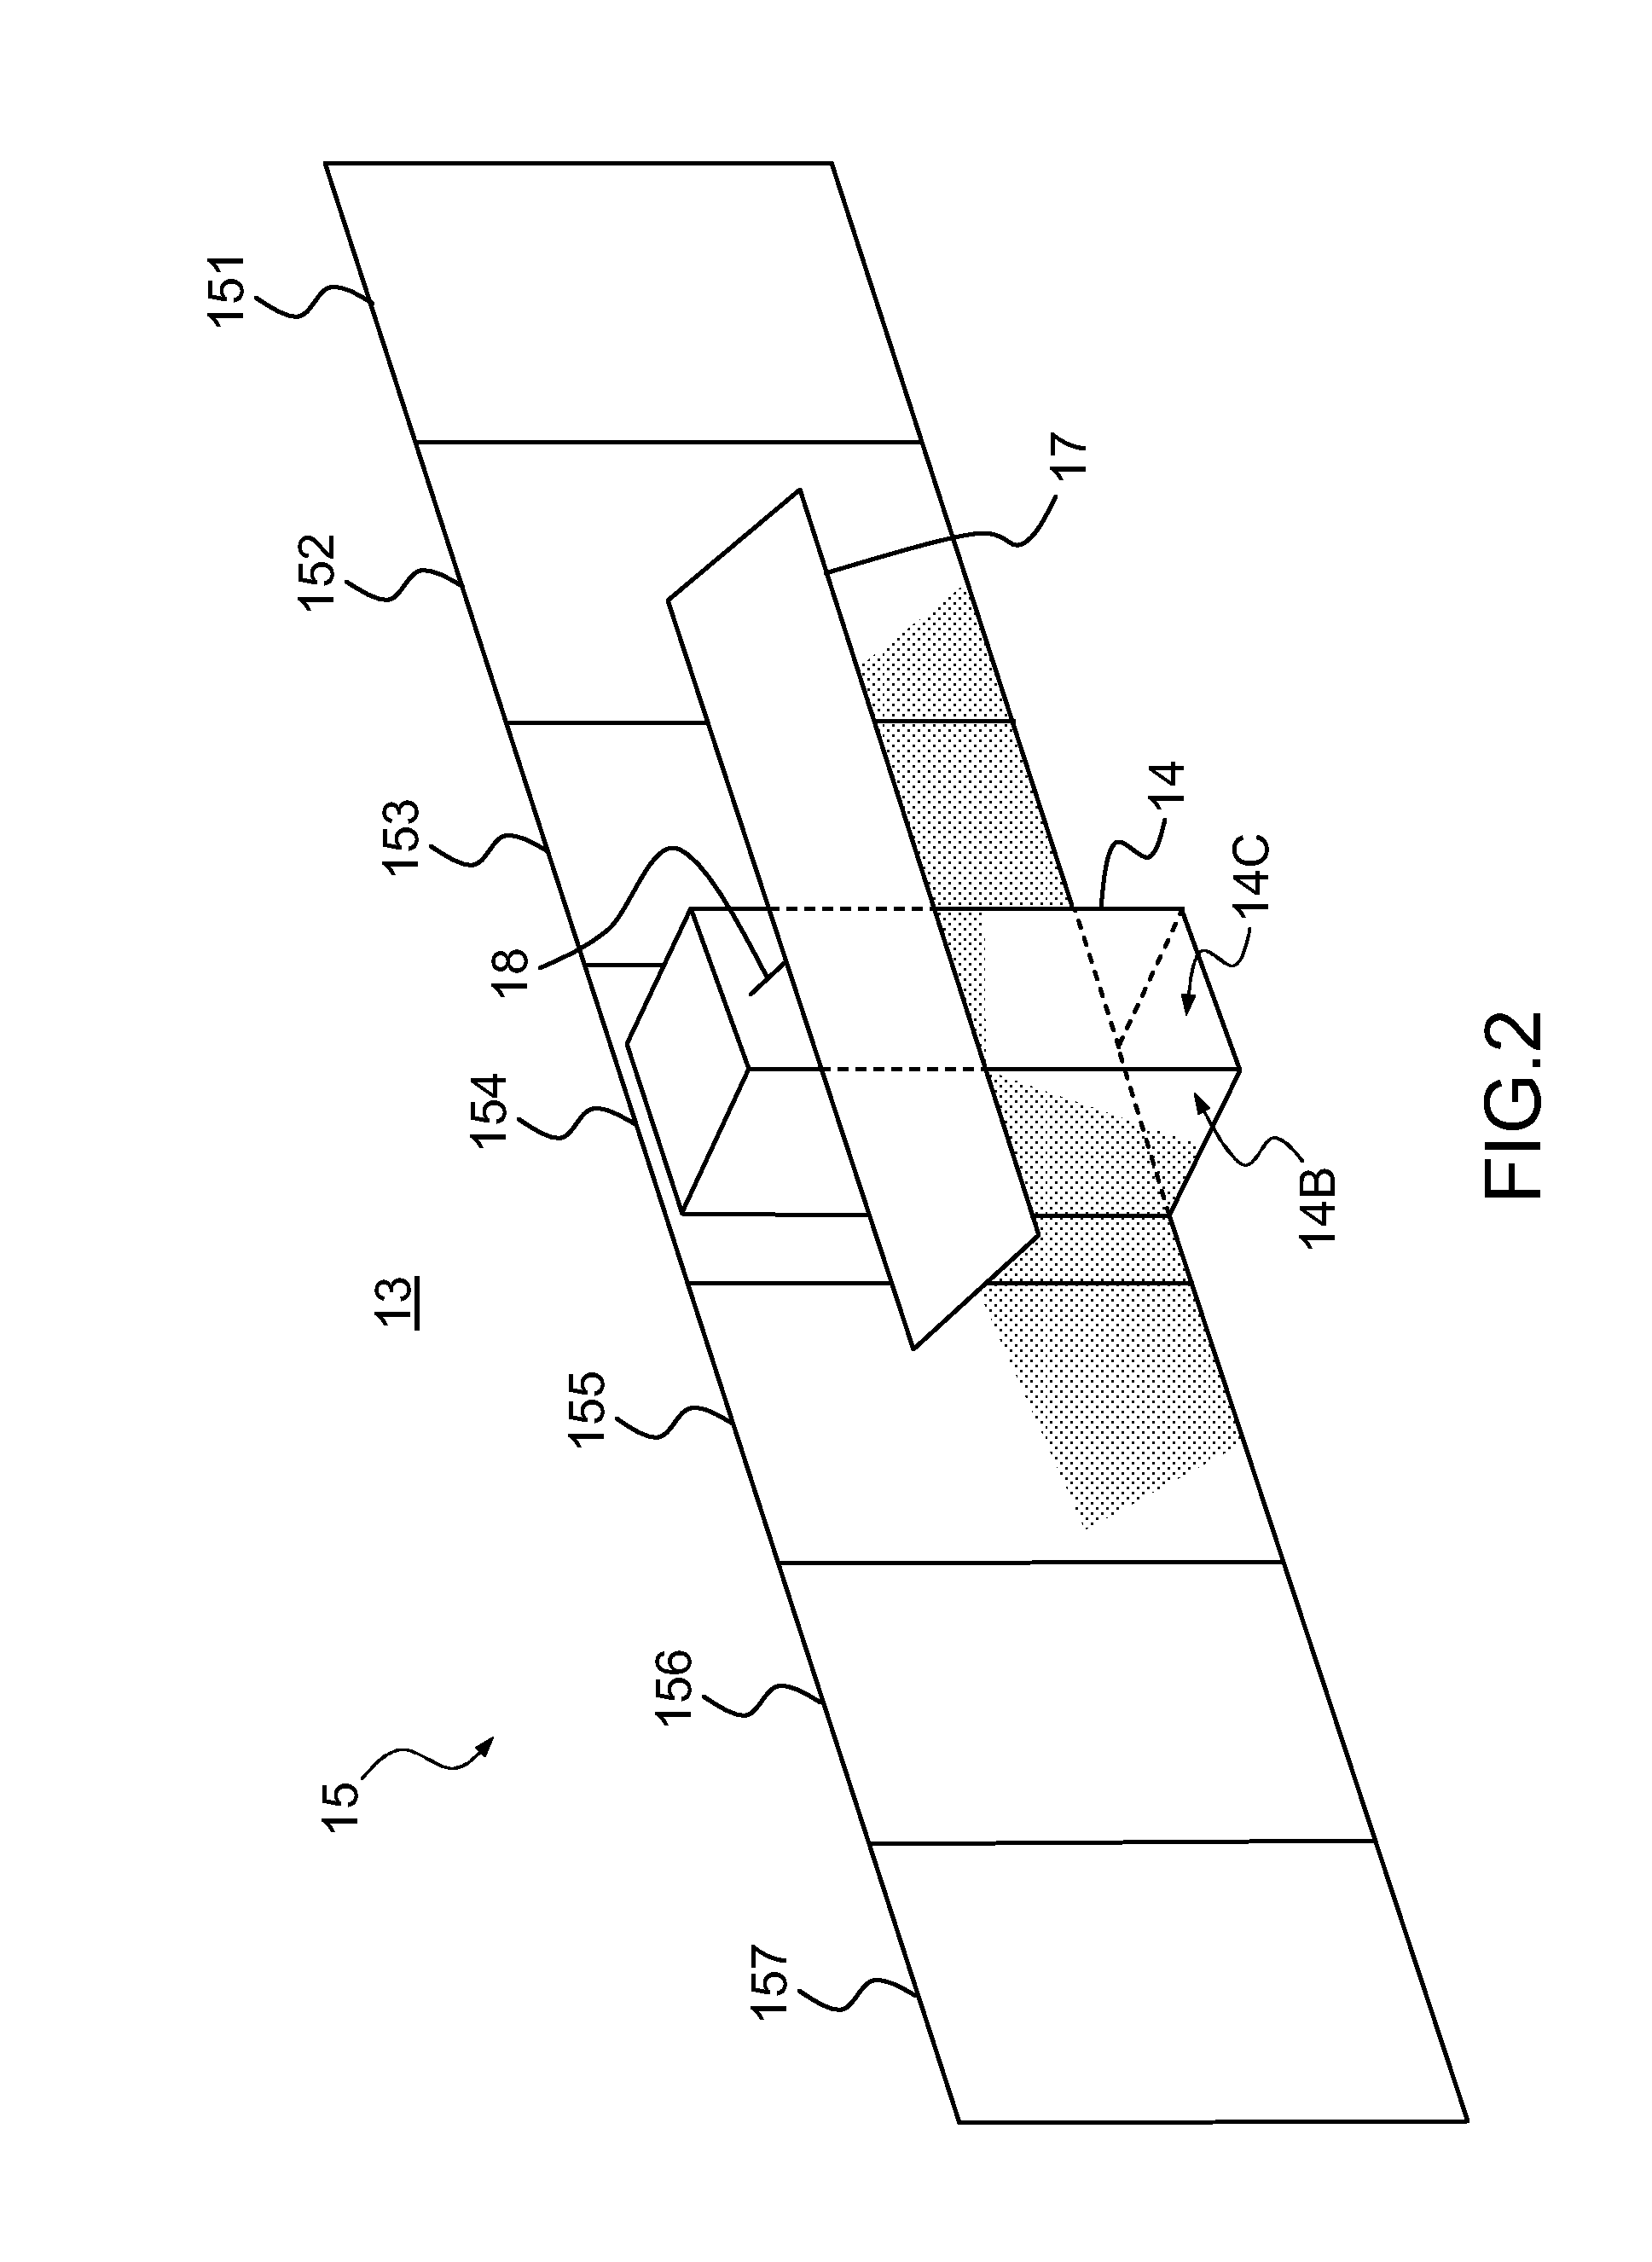 Deployable Structure Forming an Antenna Equipped with a Solar Generator for a Satellite